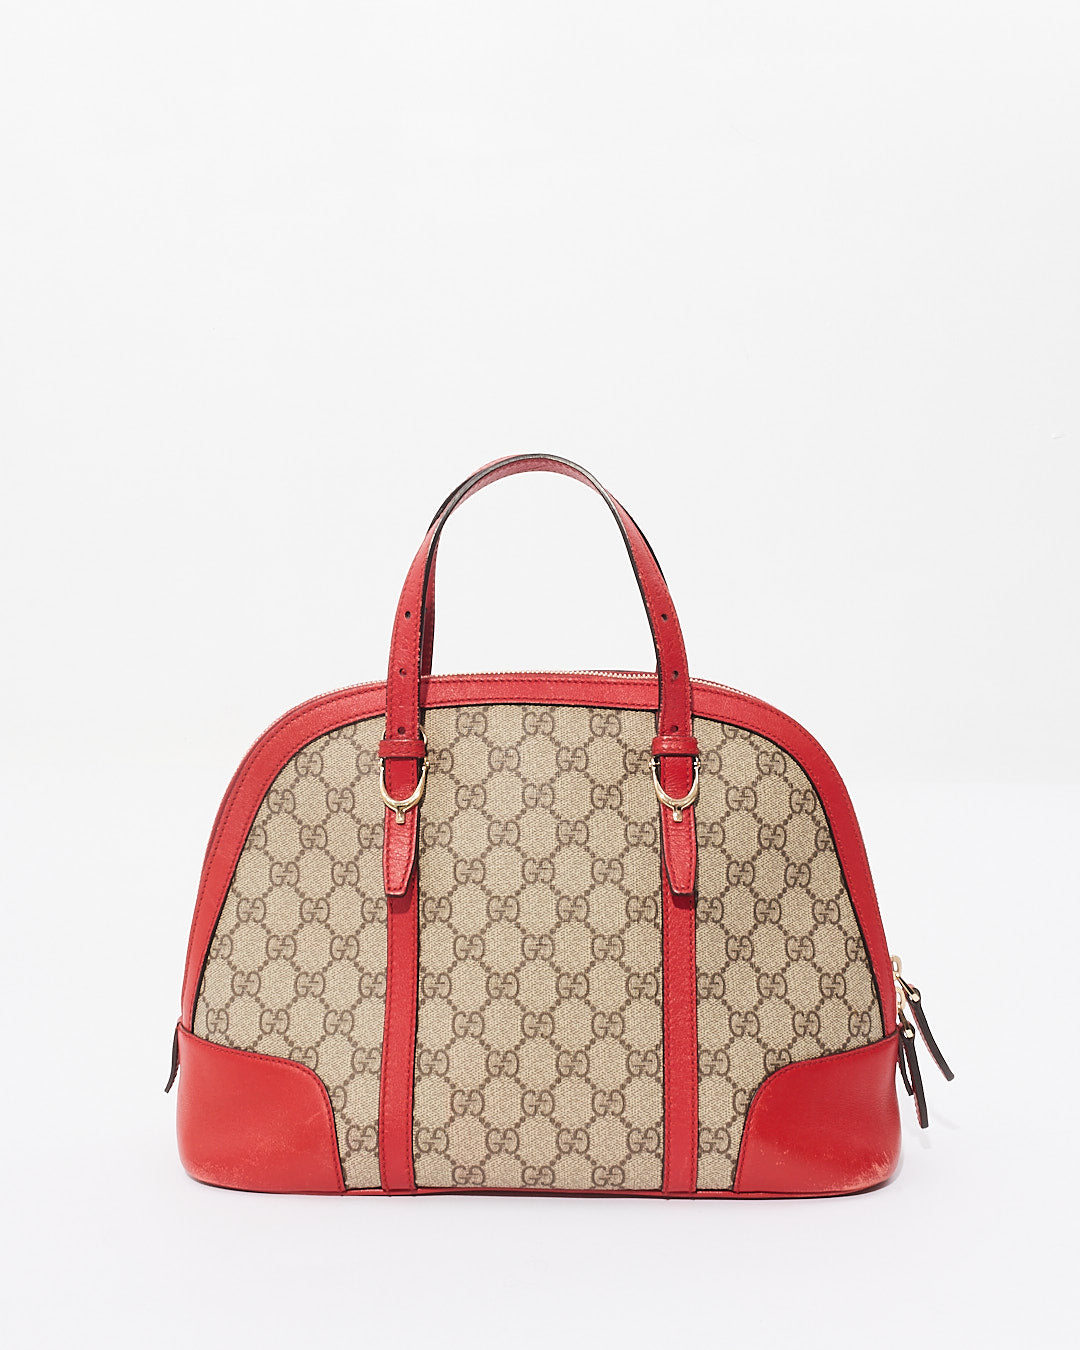 Gucci Beige/Rouge GG Supreme Top Handle Tote 